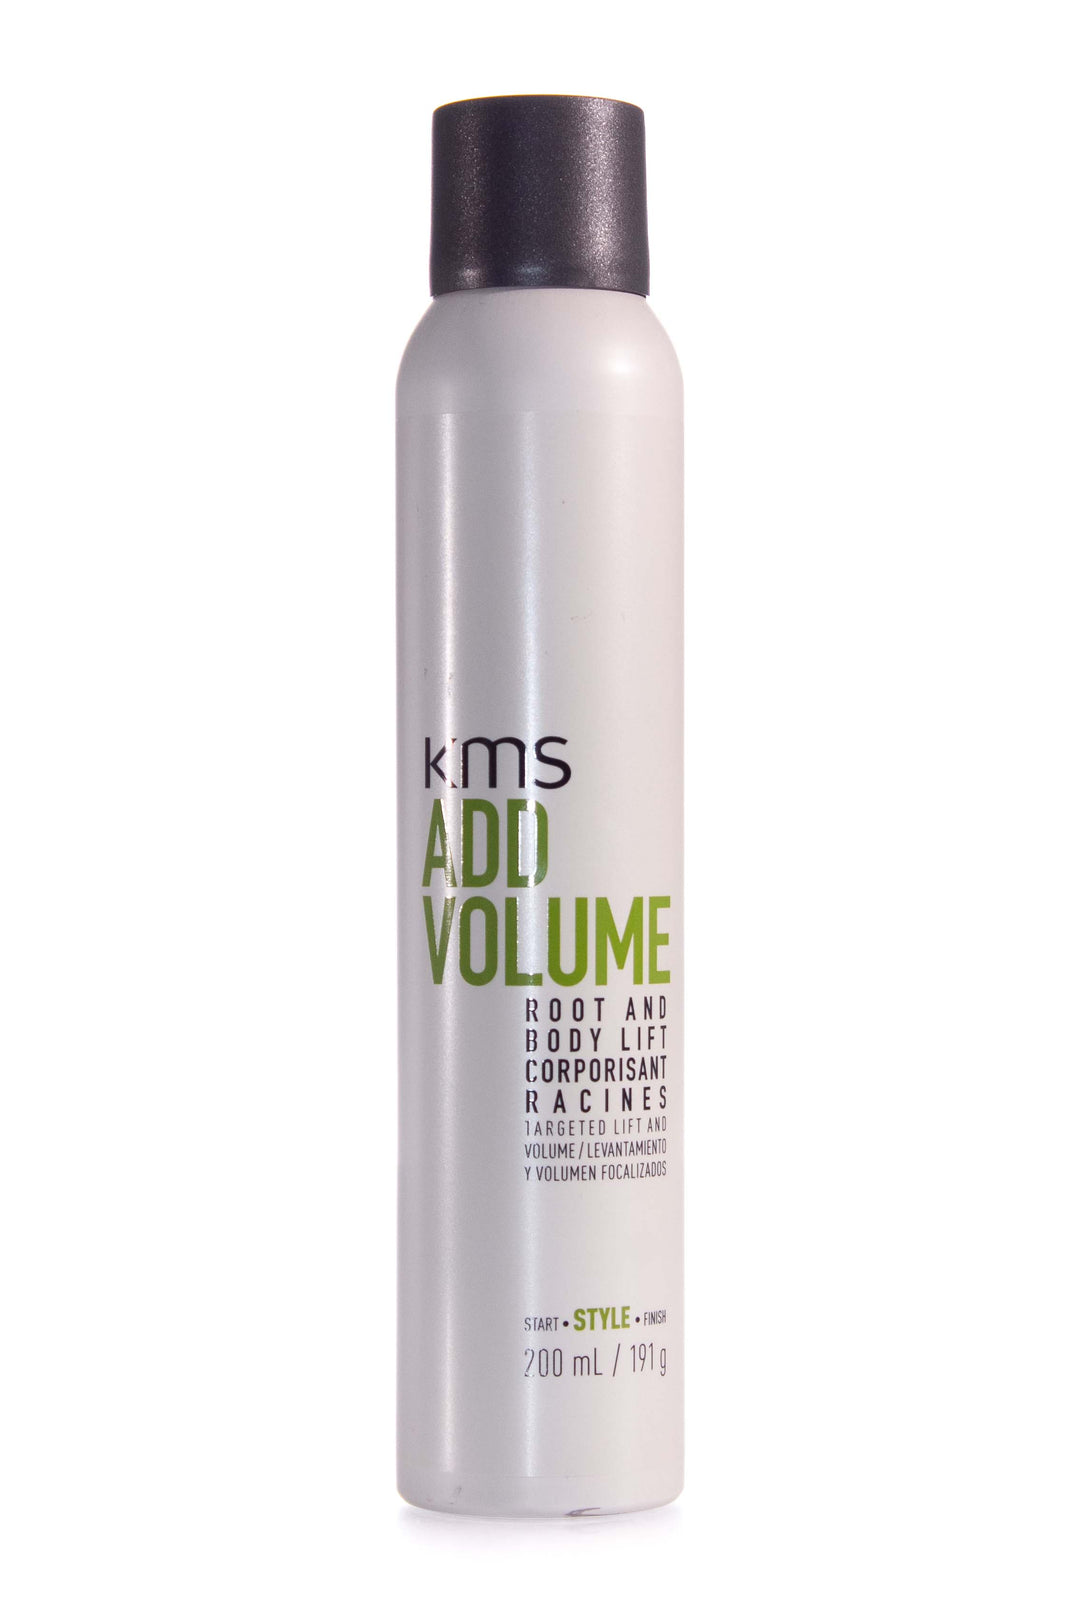 kms-add-volume-root-and-body-lift-200ml